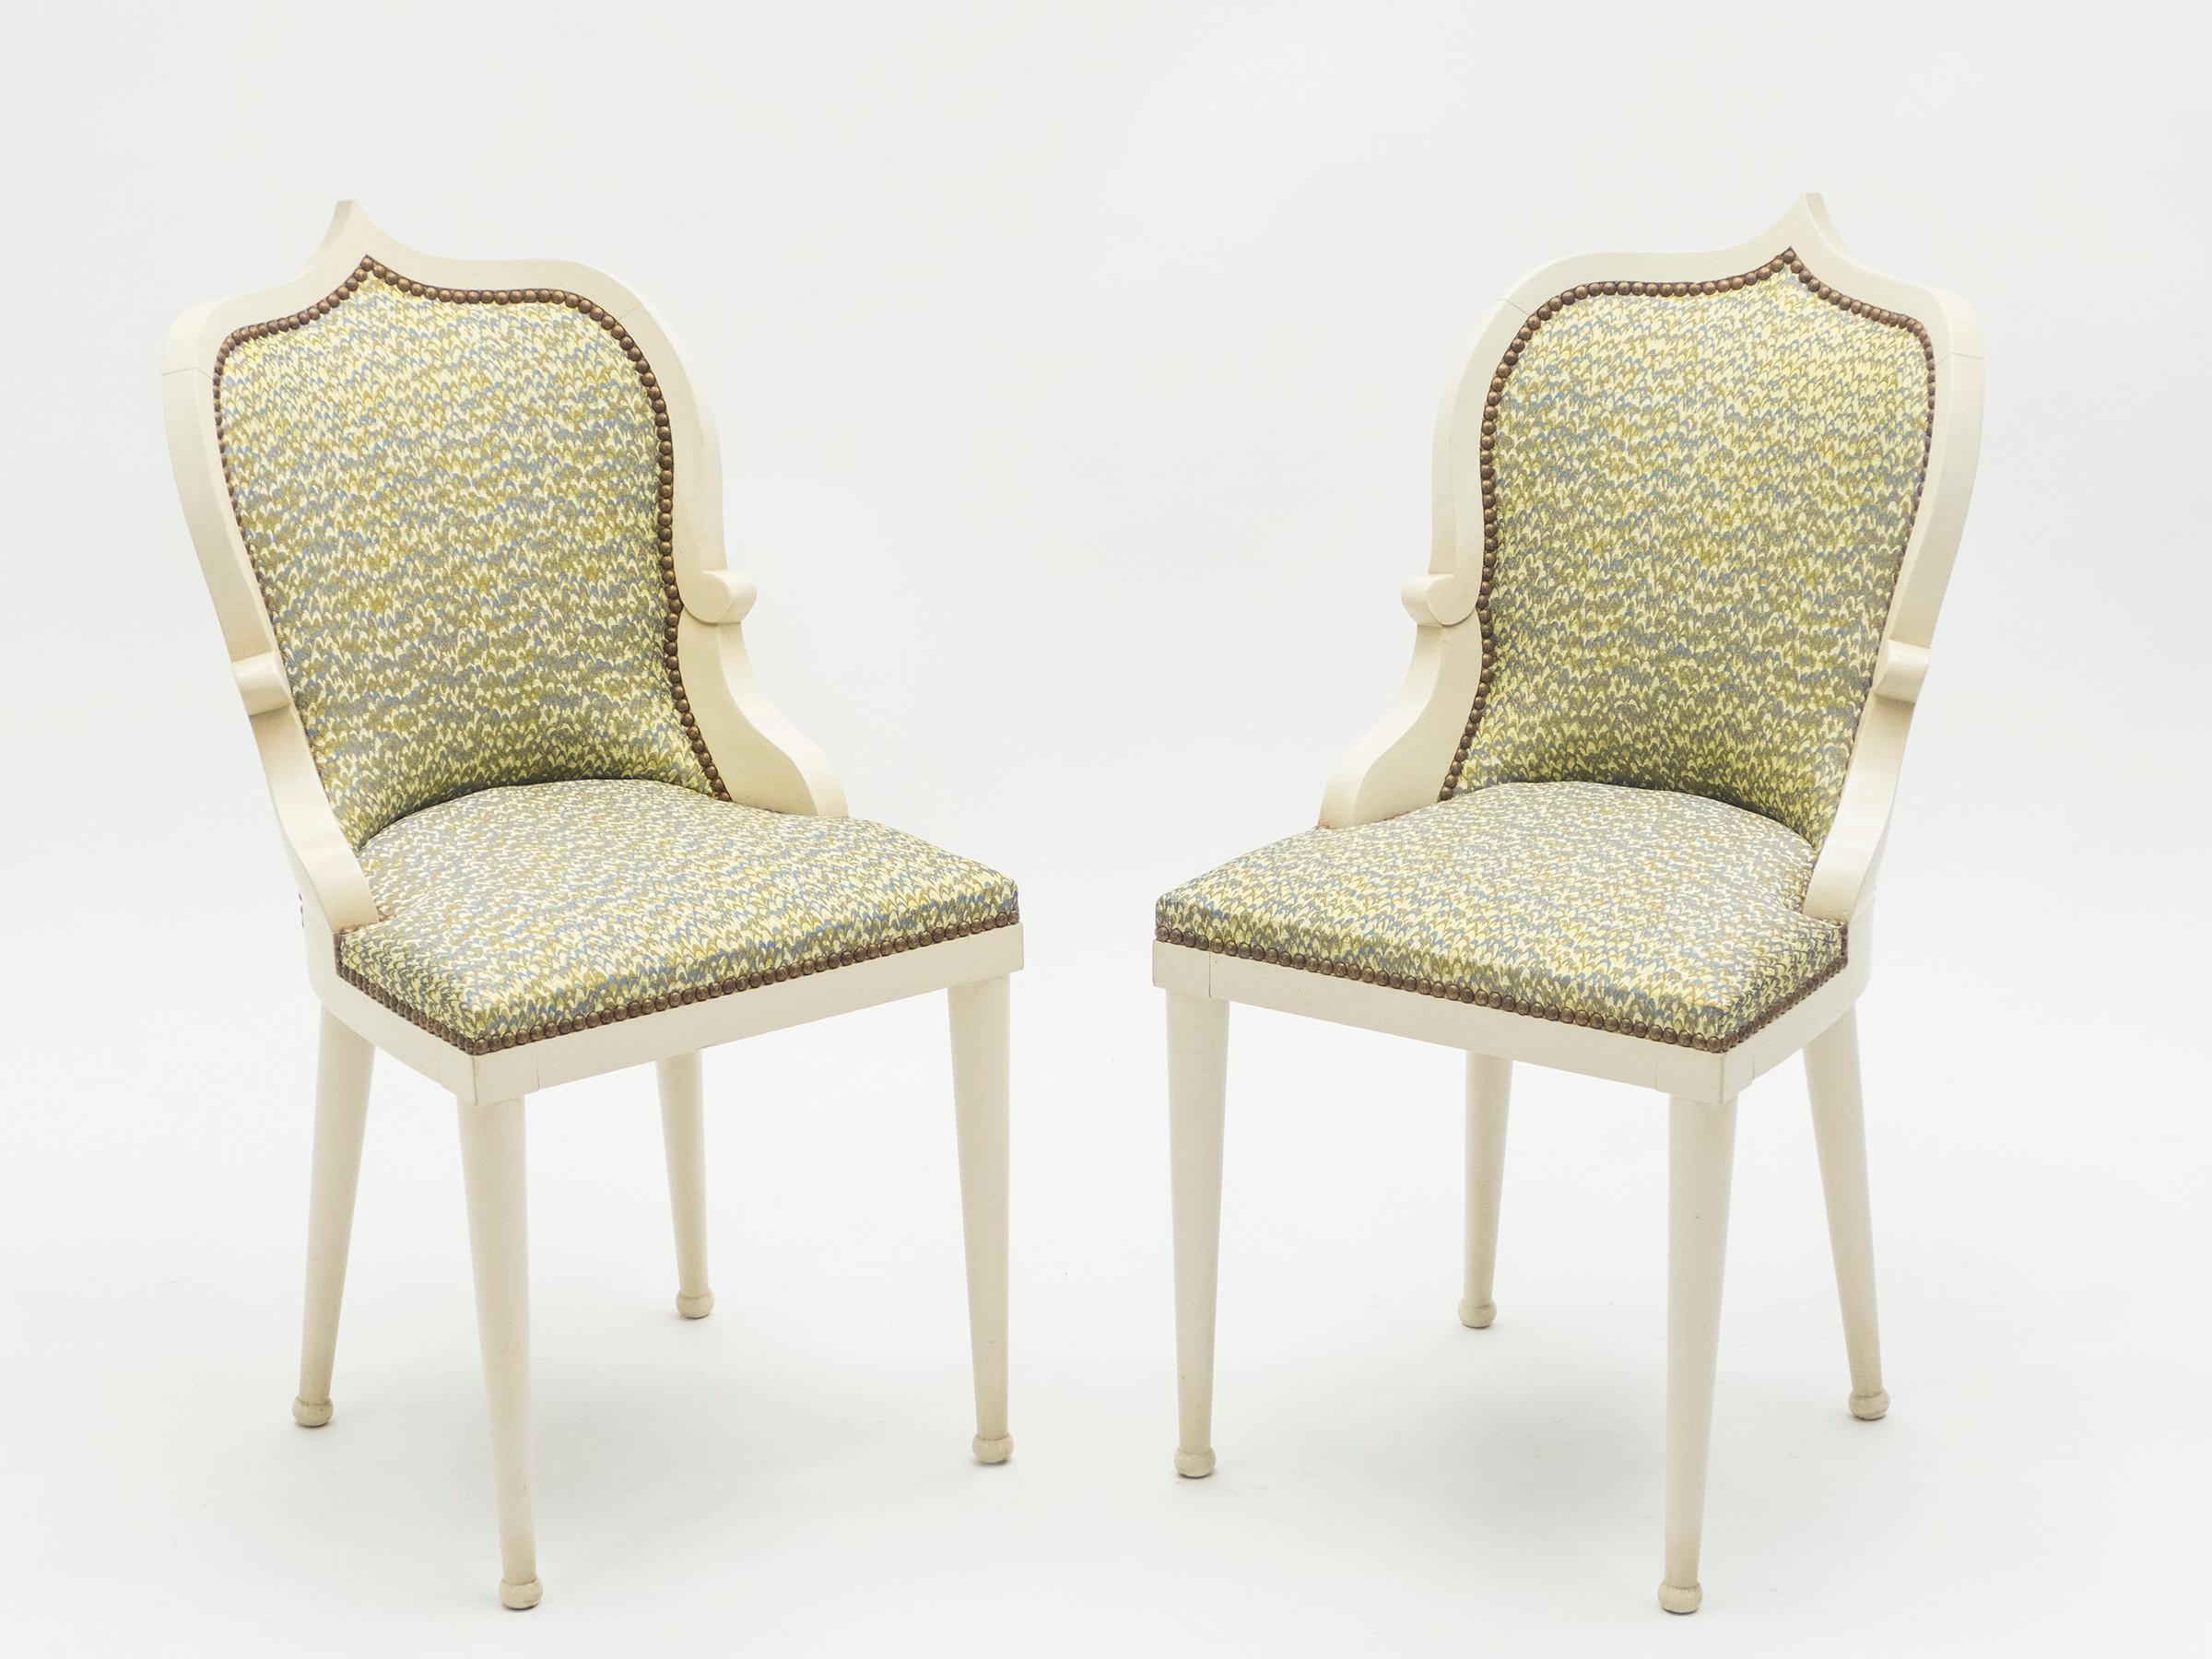 This is a rare pair of chairs by Elizabeth Garouste & Mattia Bonetti, model Palace, made in white cream painted solid oak. Garouste & Bonetti began their collaboration and gained global recognition for their interior design of the Paris nightclub Le